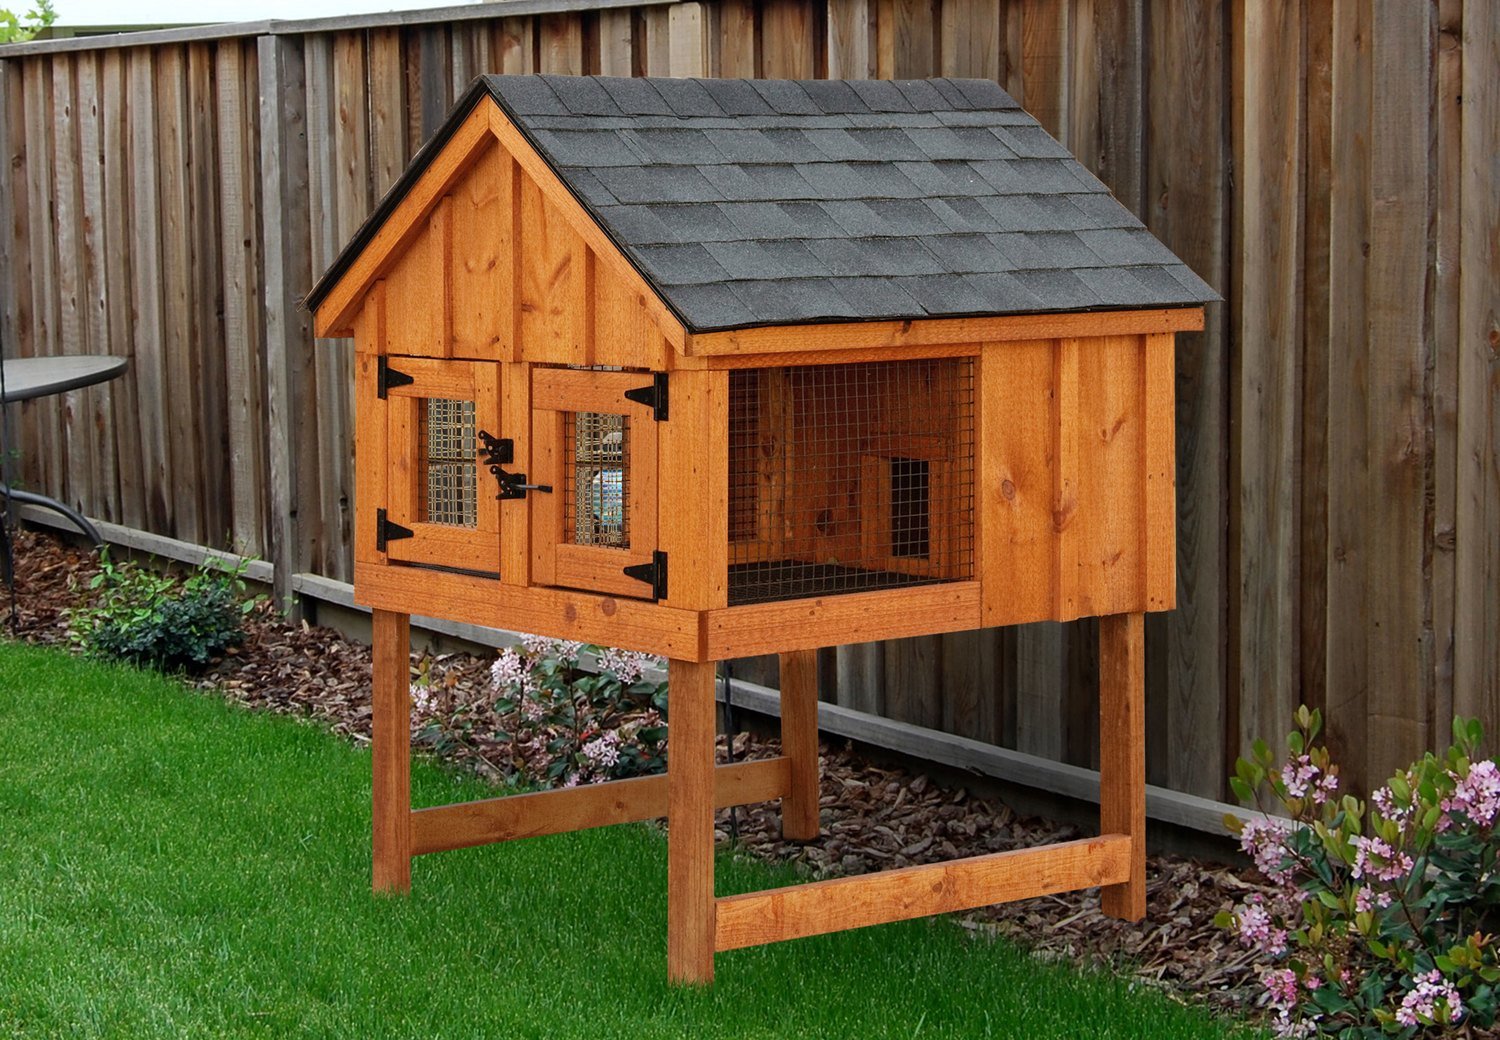 3 Tips for Maintaining an Outdoor Rabbit Hutch